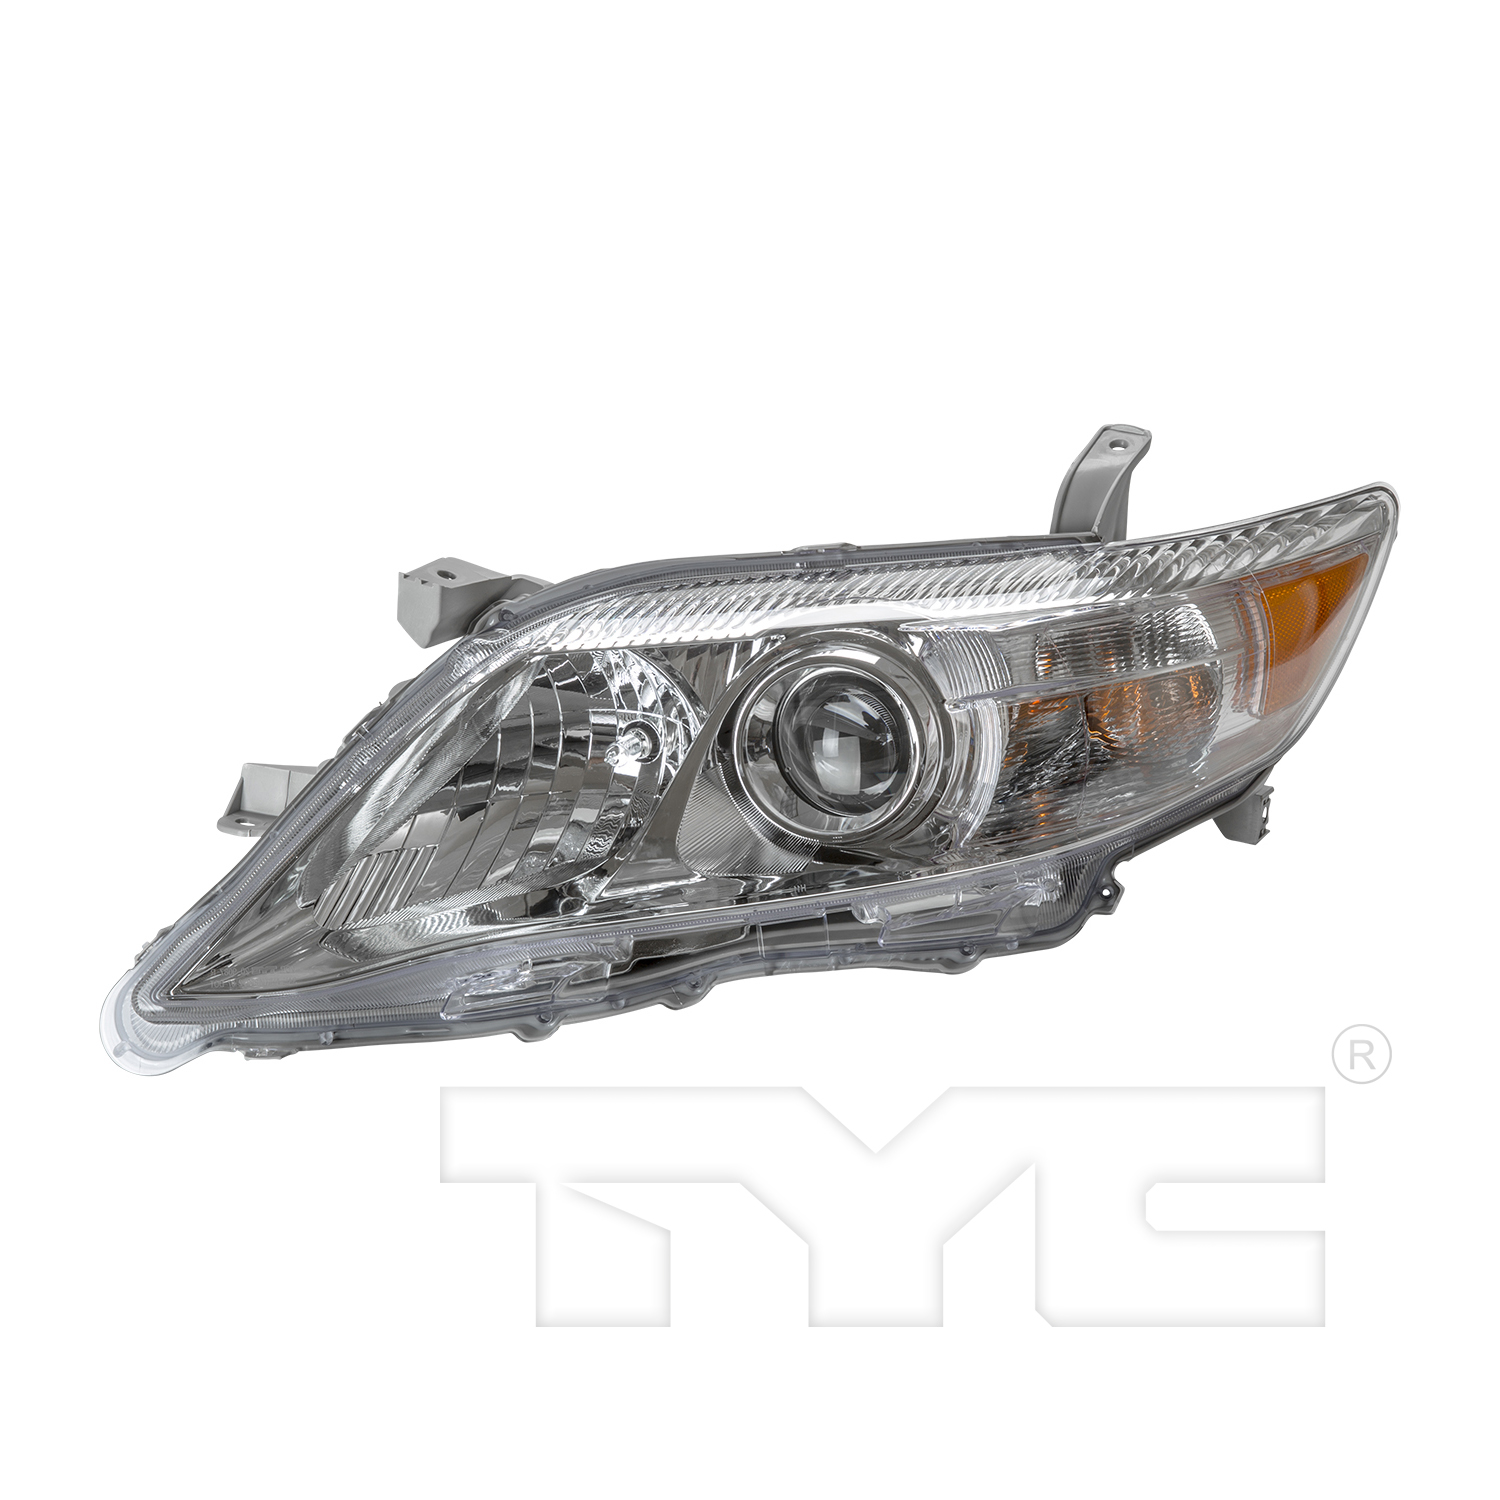 Aftermarket HEADLIGHTS for TOYOTA - CAMRY, CAMRY,10-11,LT Headlamp assy composite